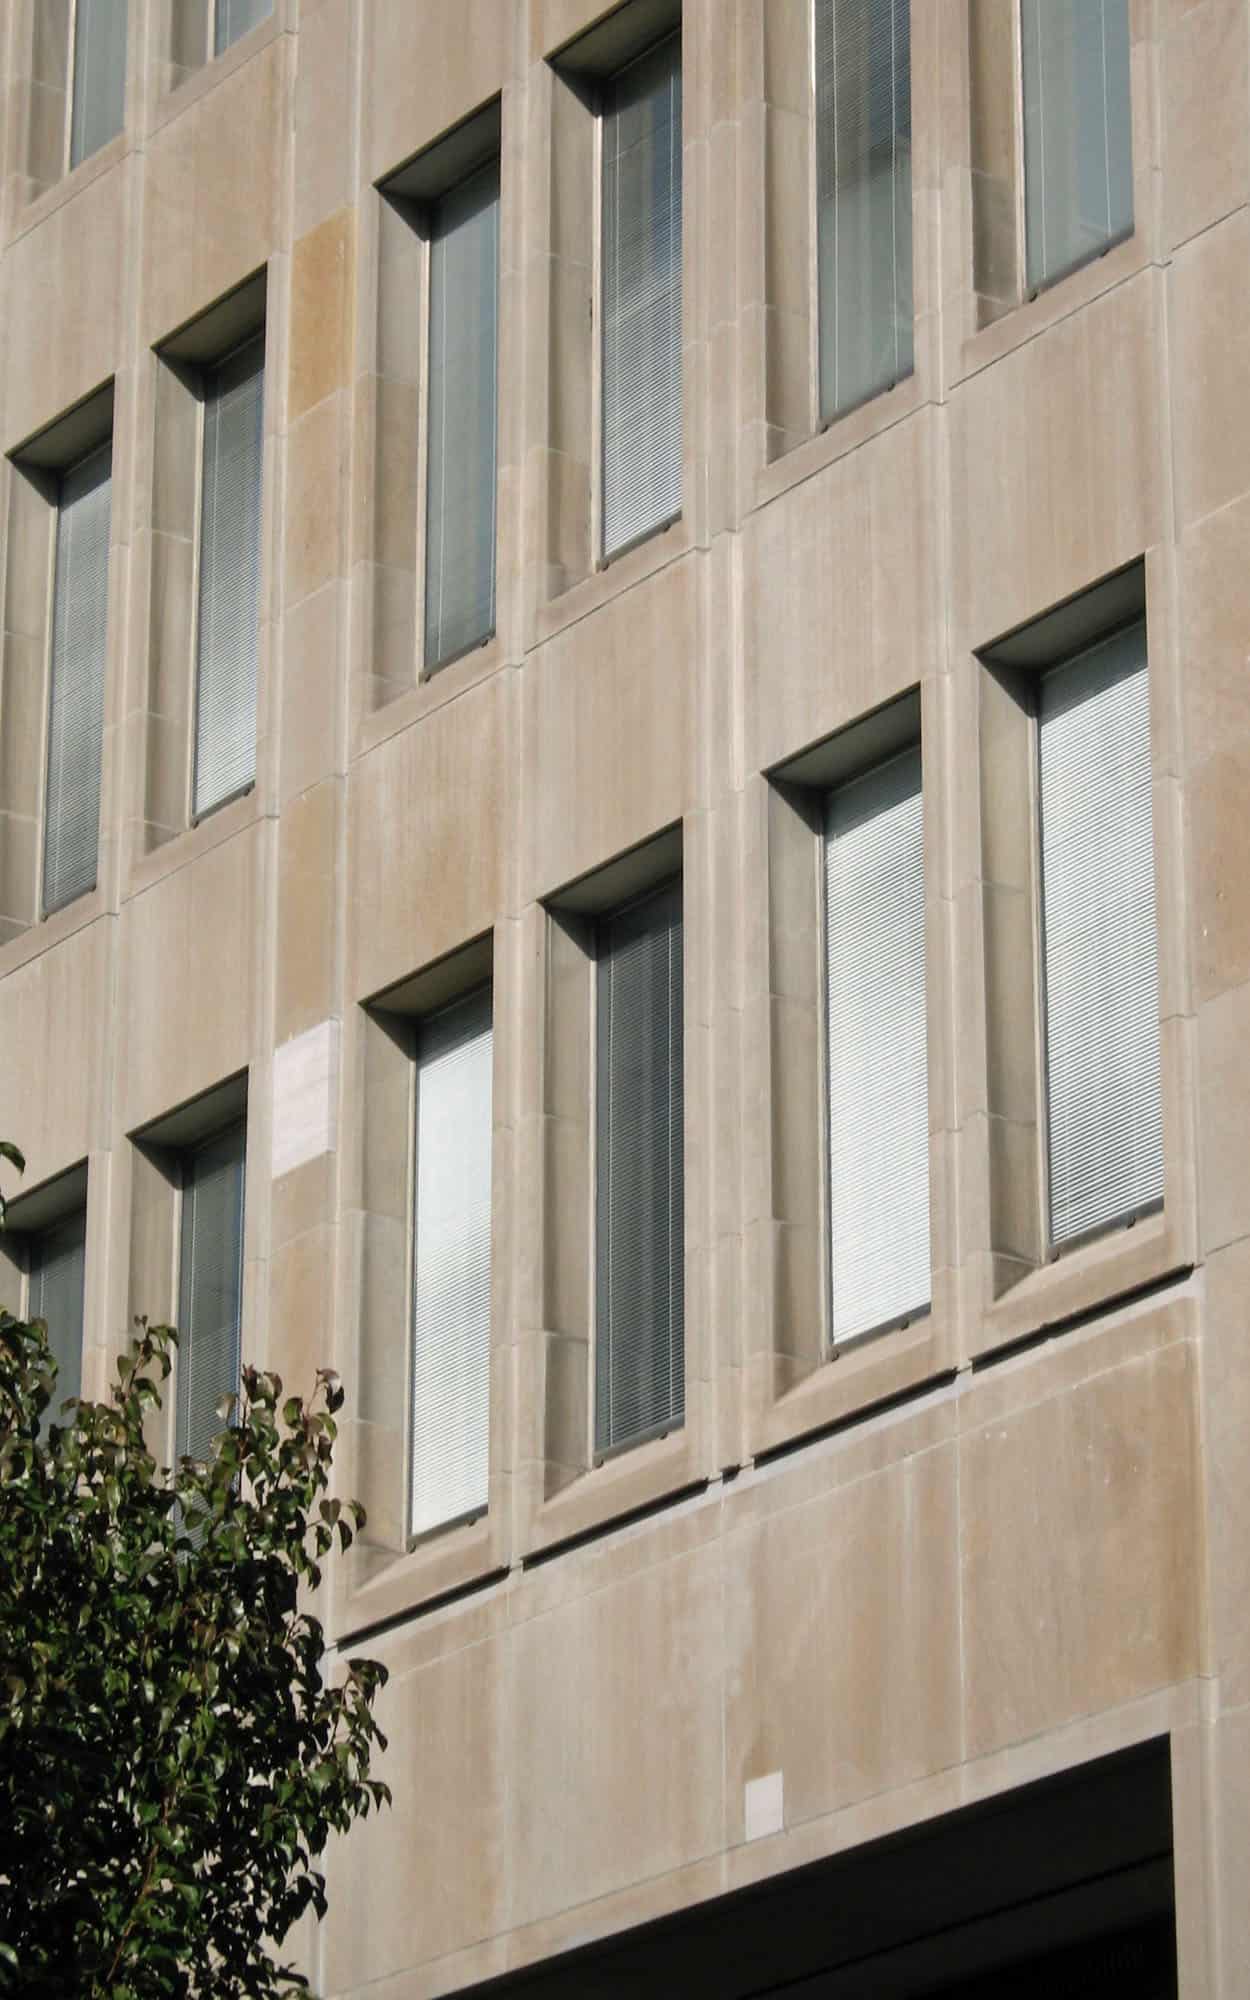 The limestone curtain wall of the office towers